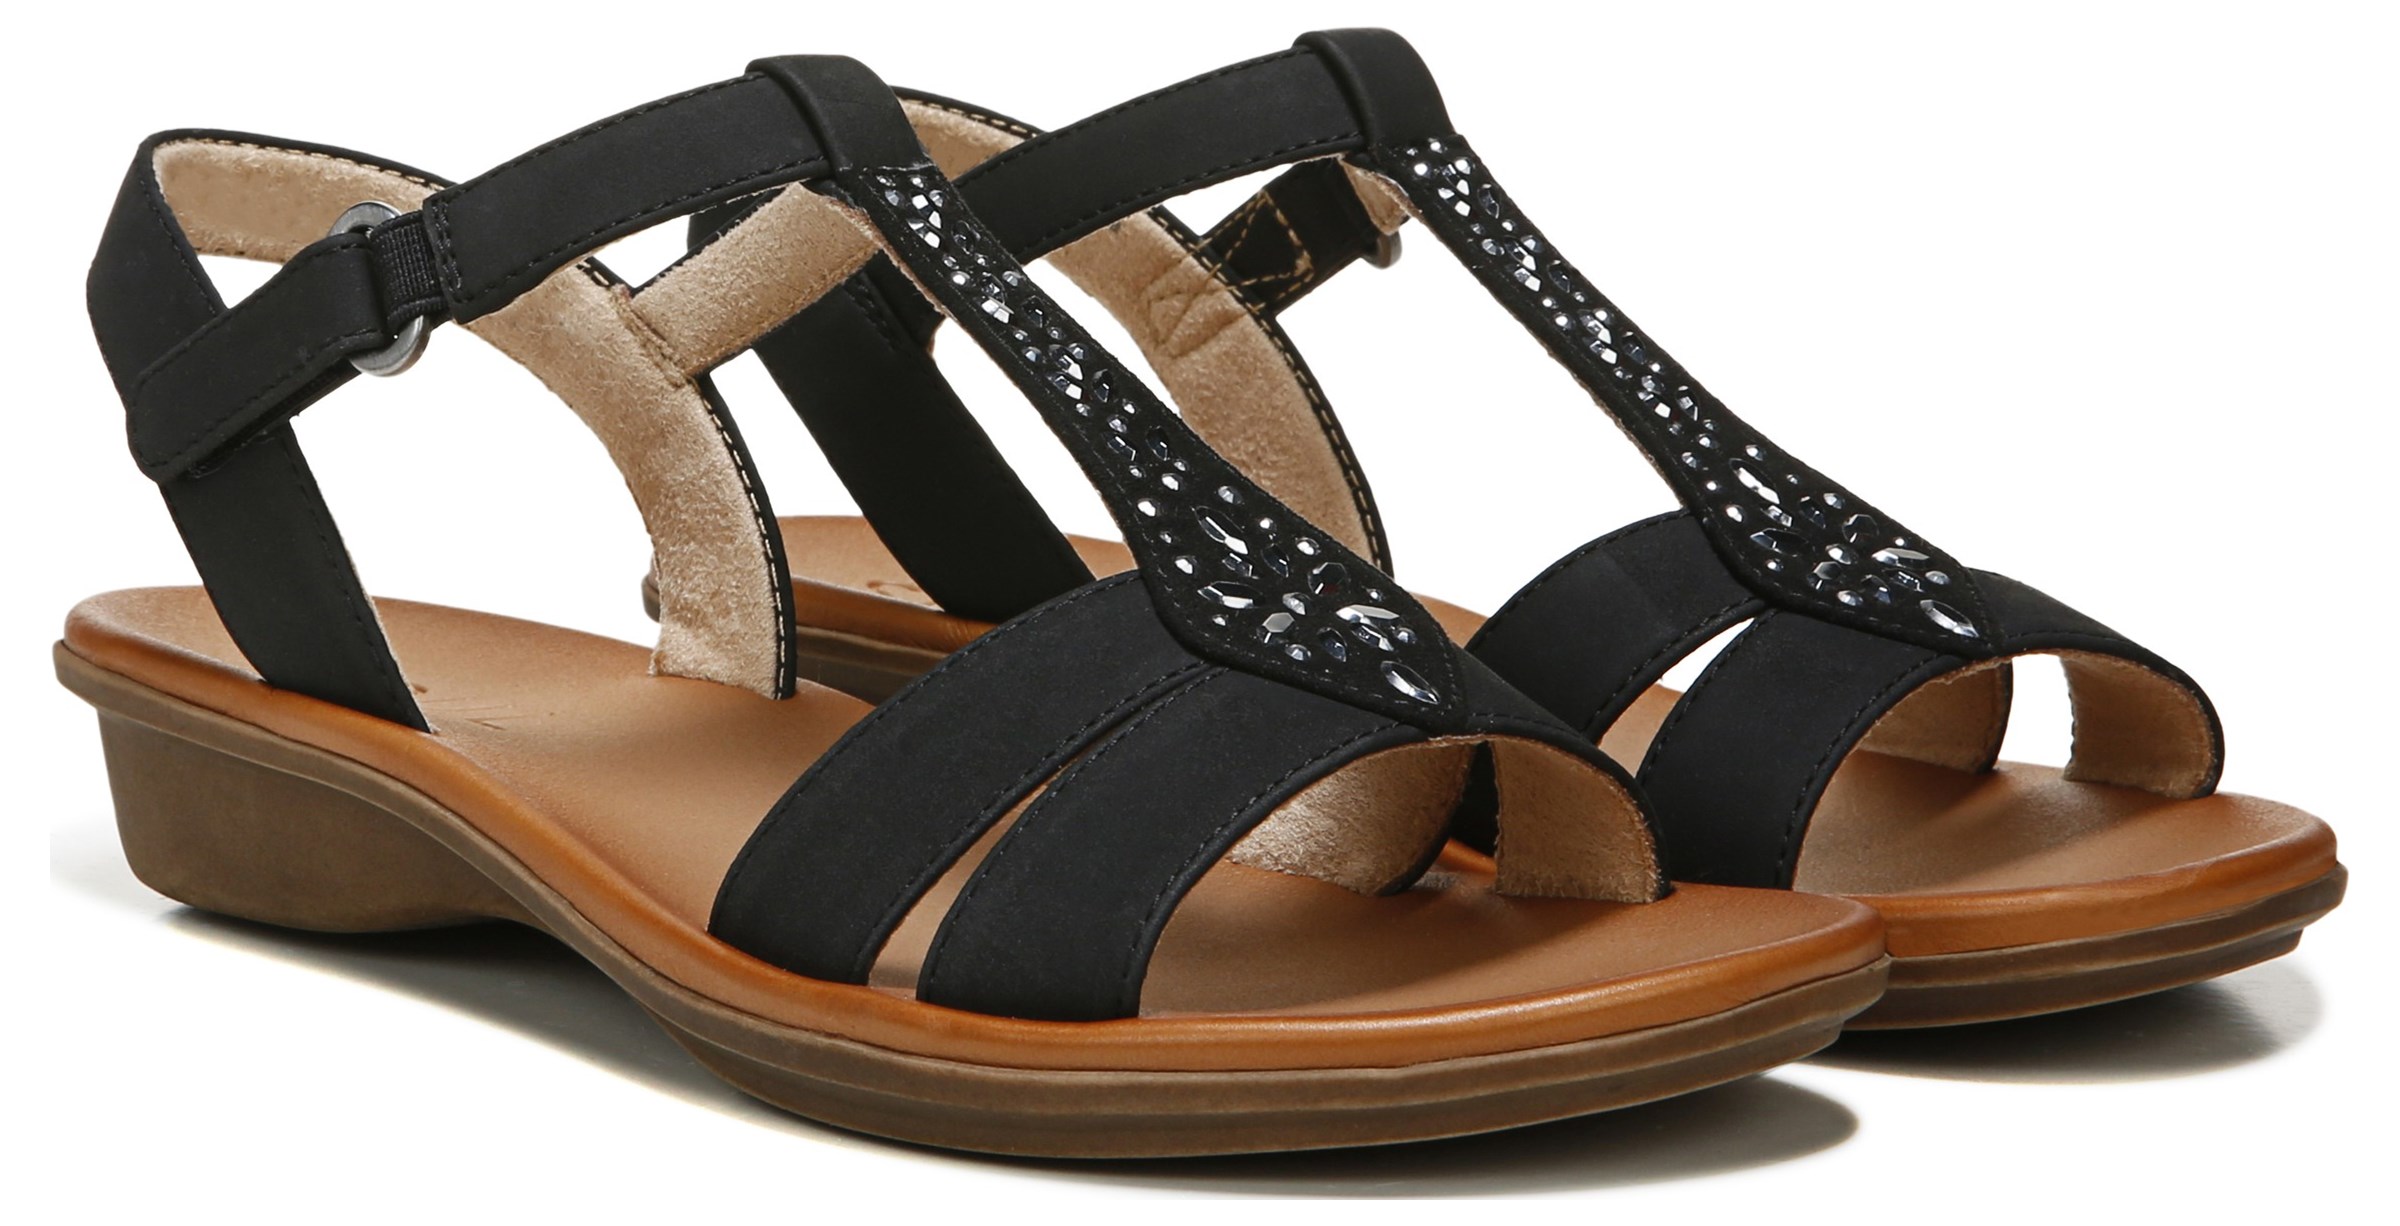 Naturalizer Sandals: Find Women's Casual Footwear for Any Occasion